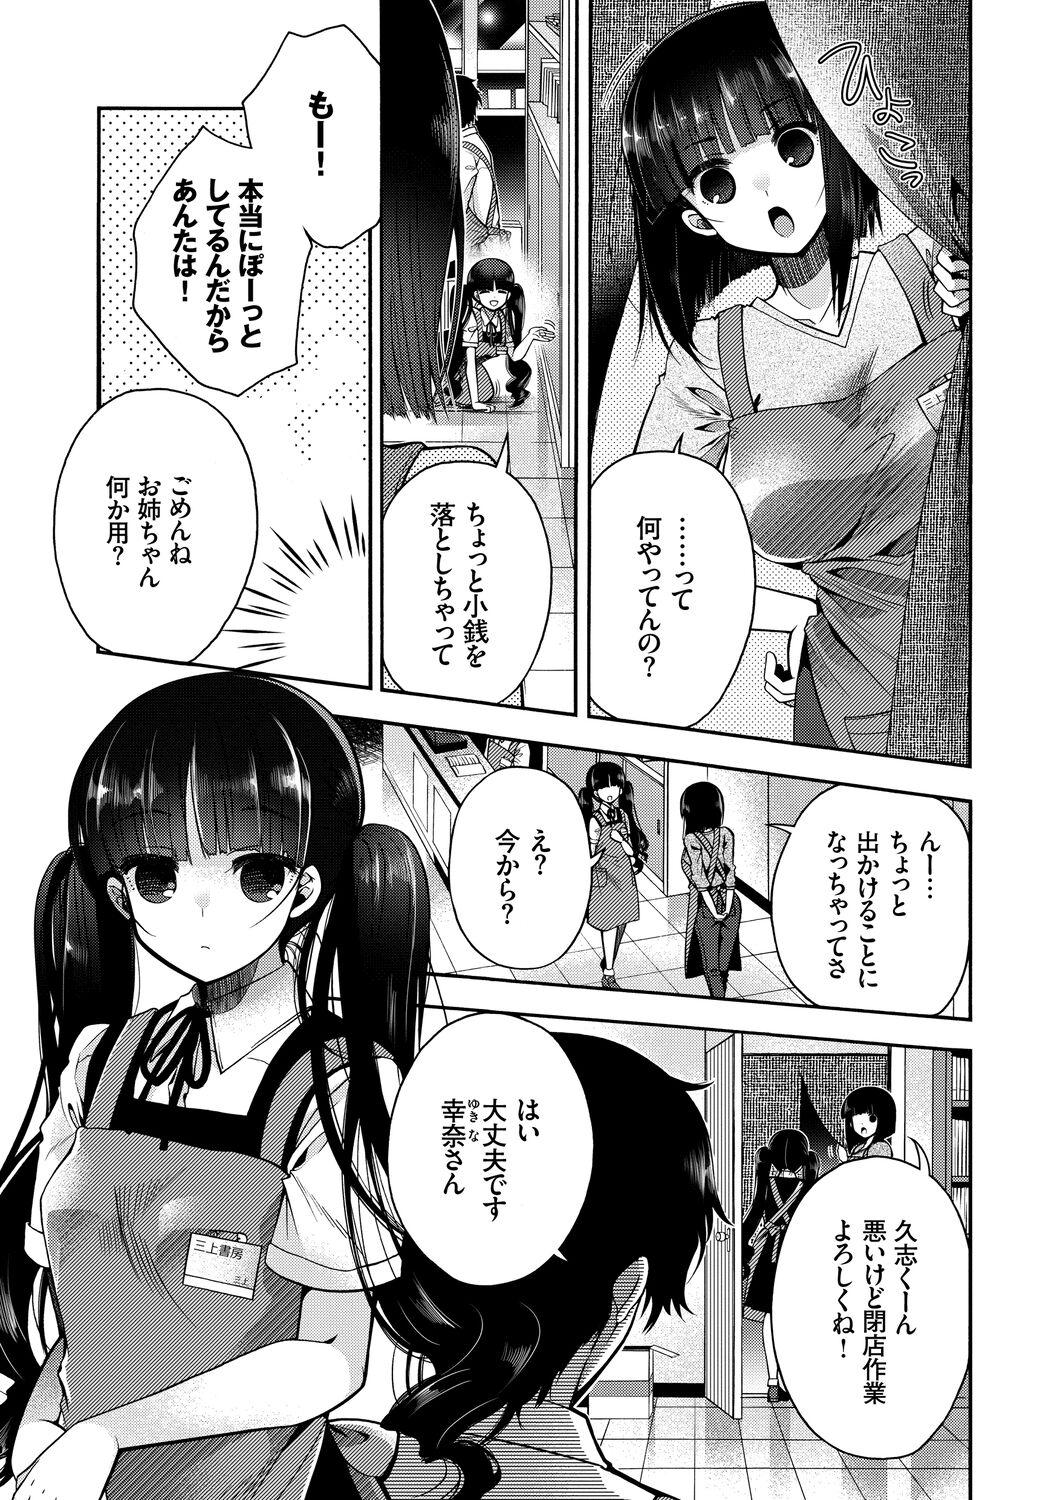 Hatsukoi Melty - Melty First Love 94